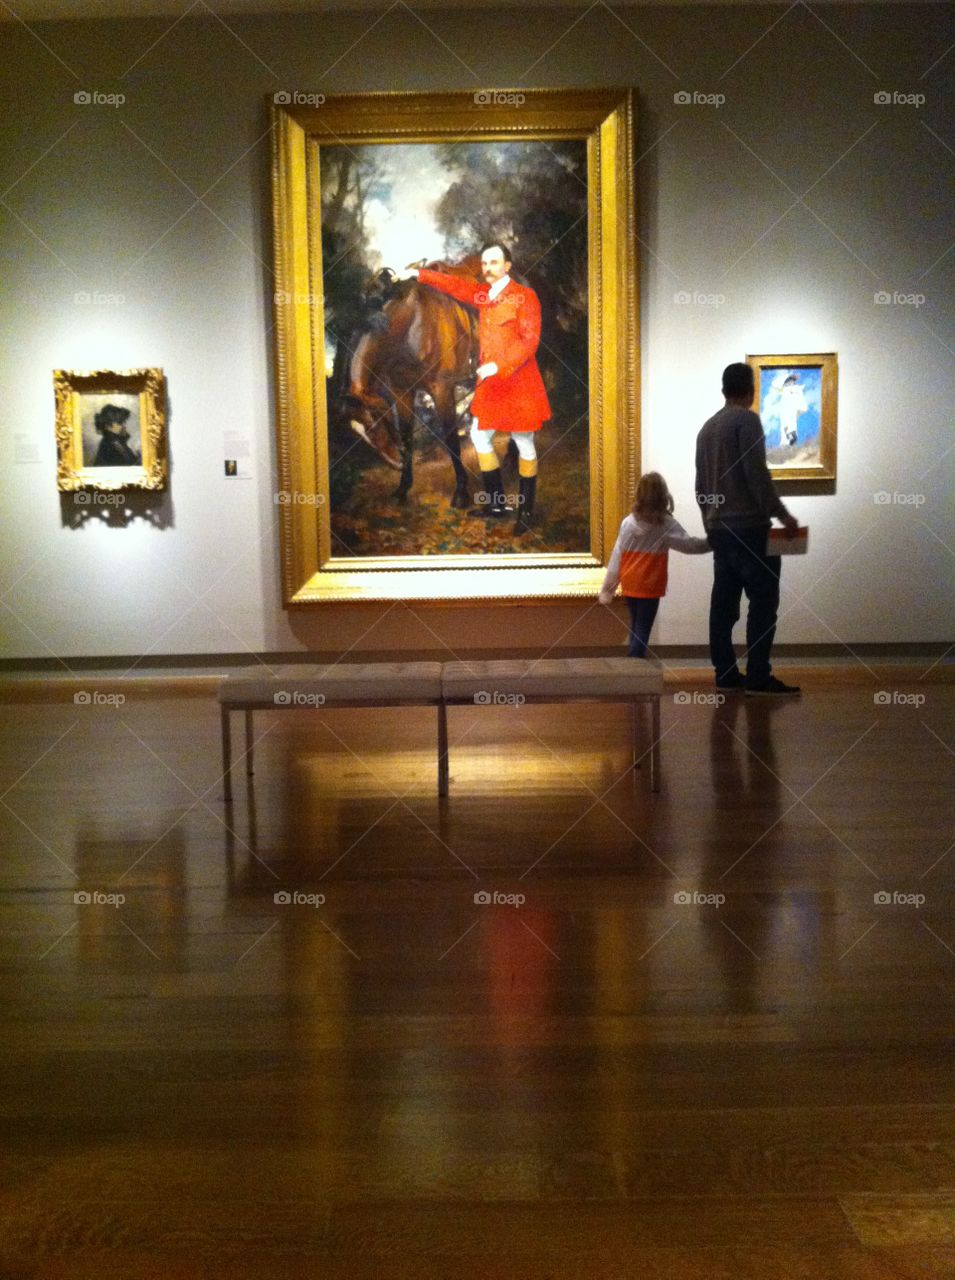 Child captivated by art